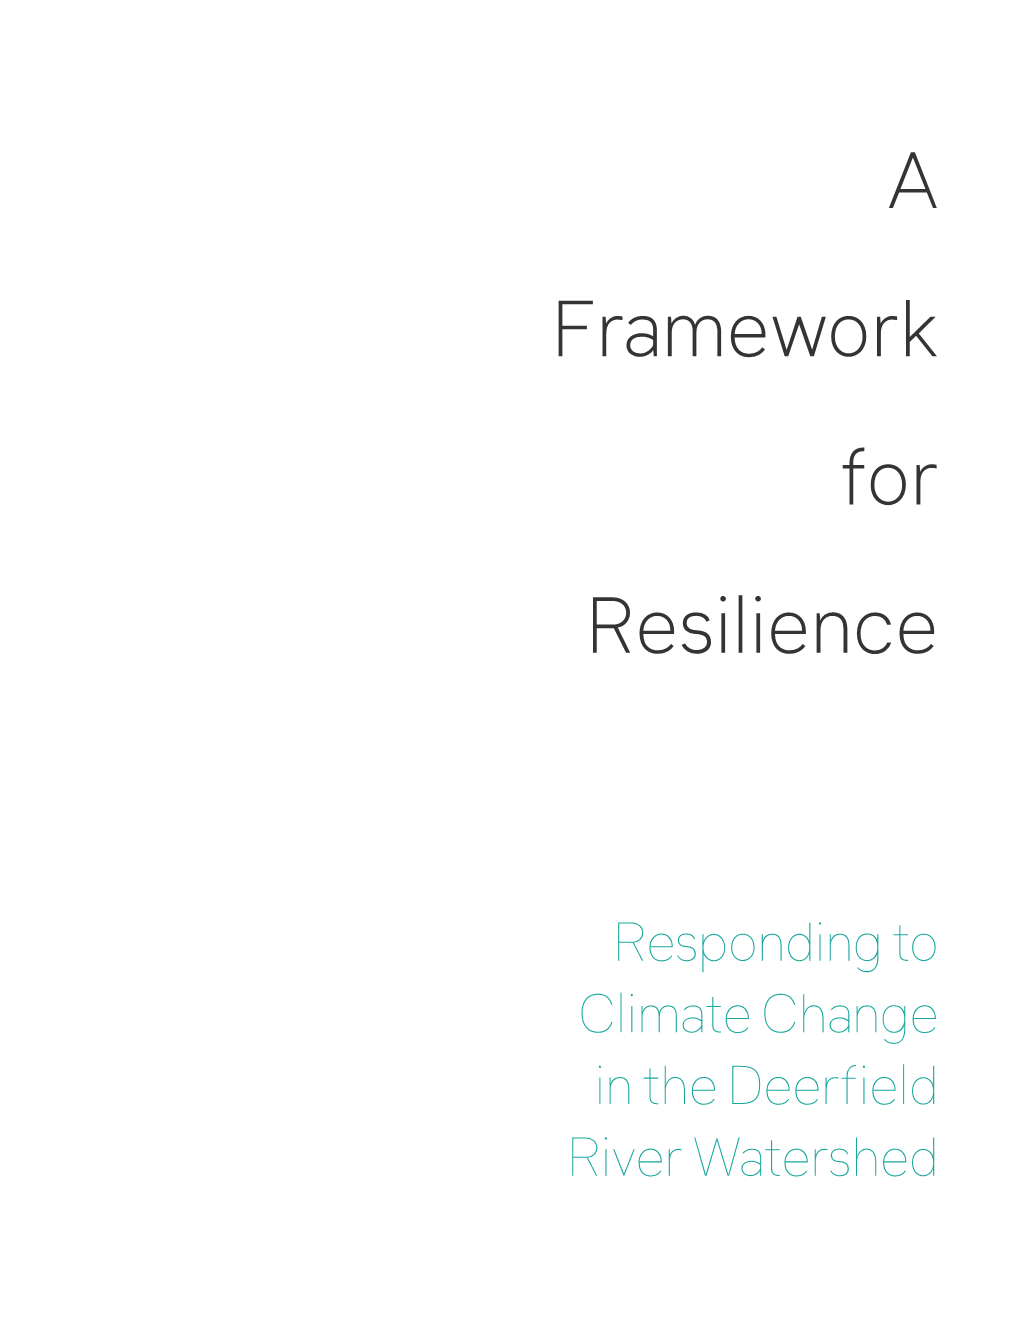 Framework for Resilience in the Deerfield River Watershed